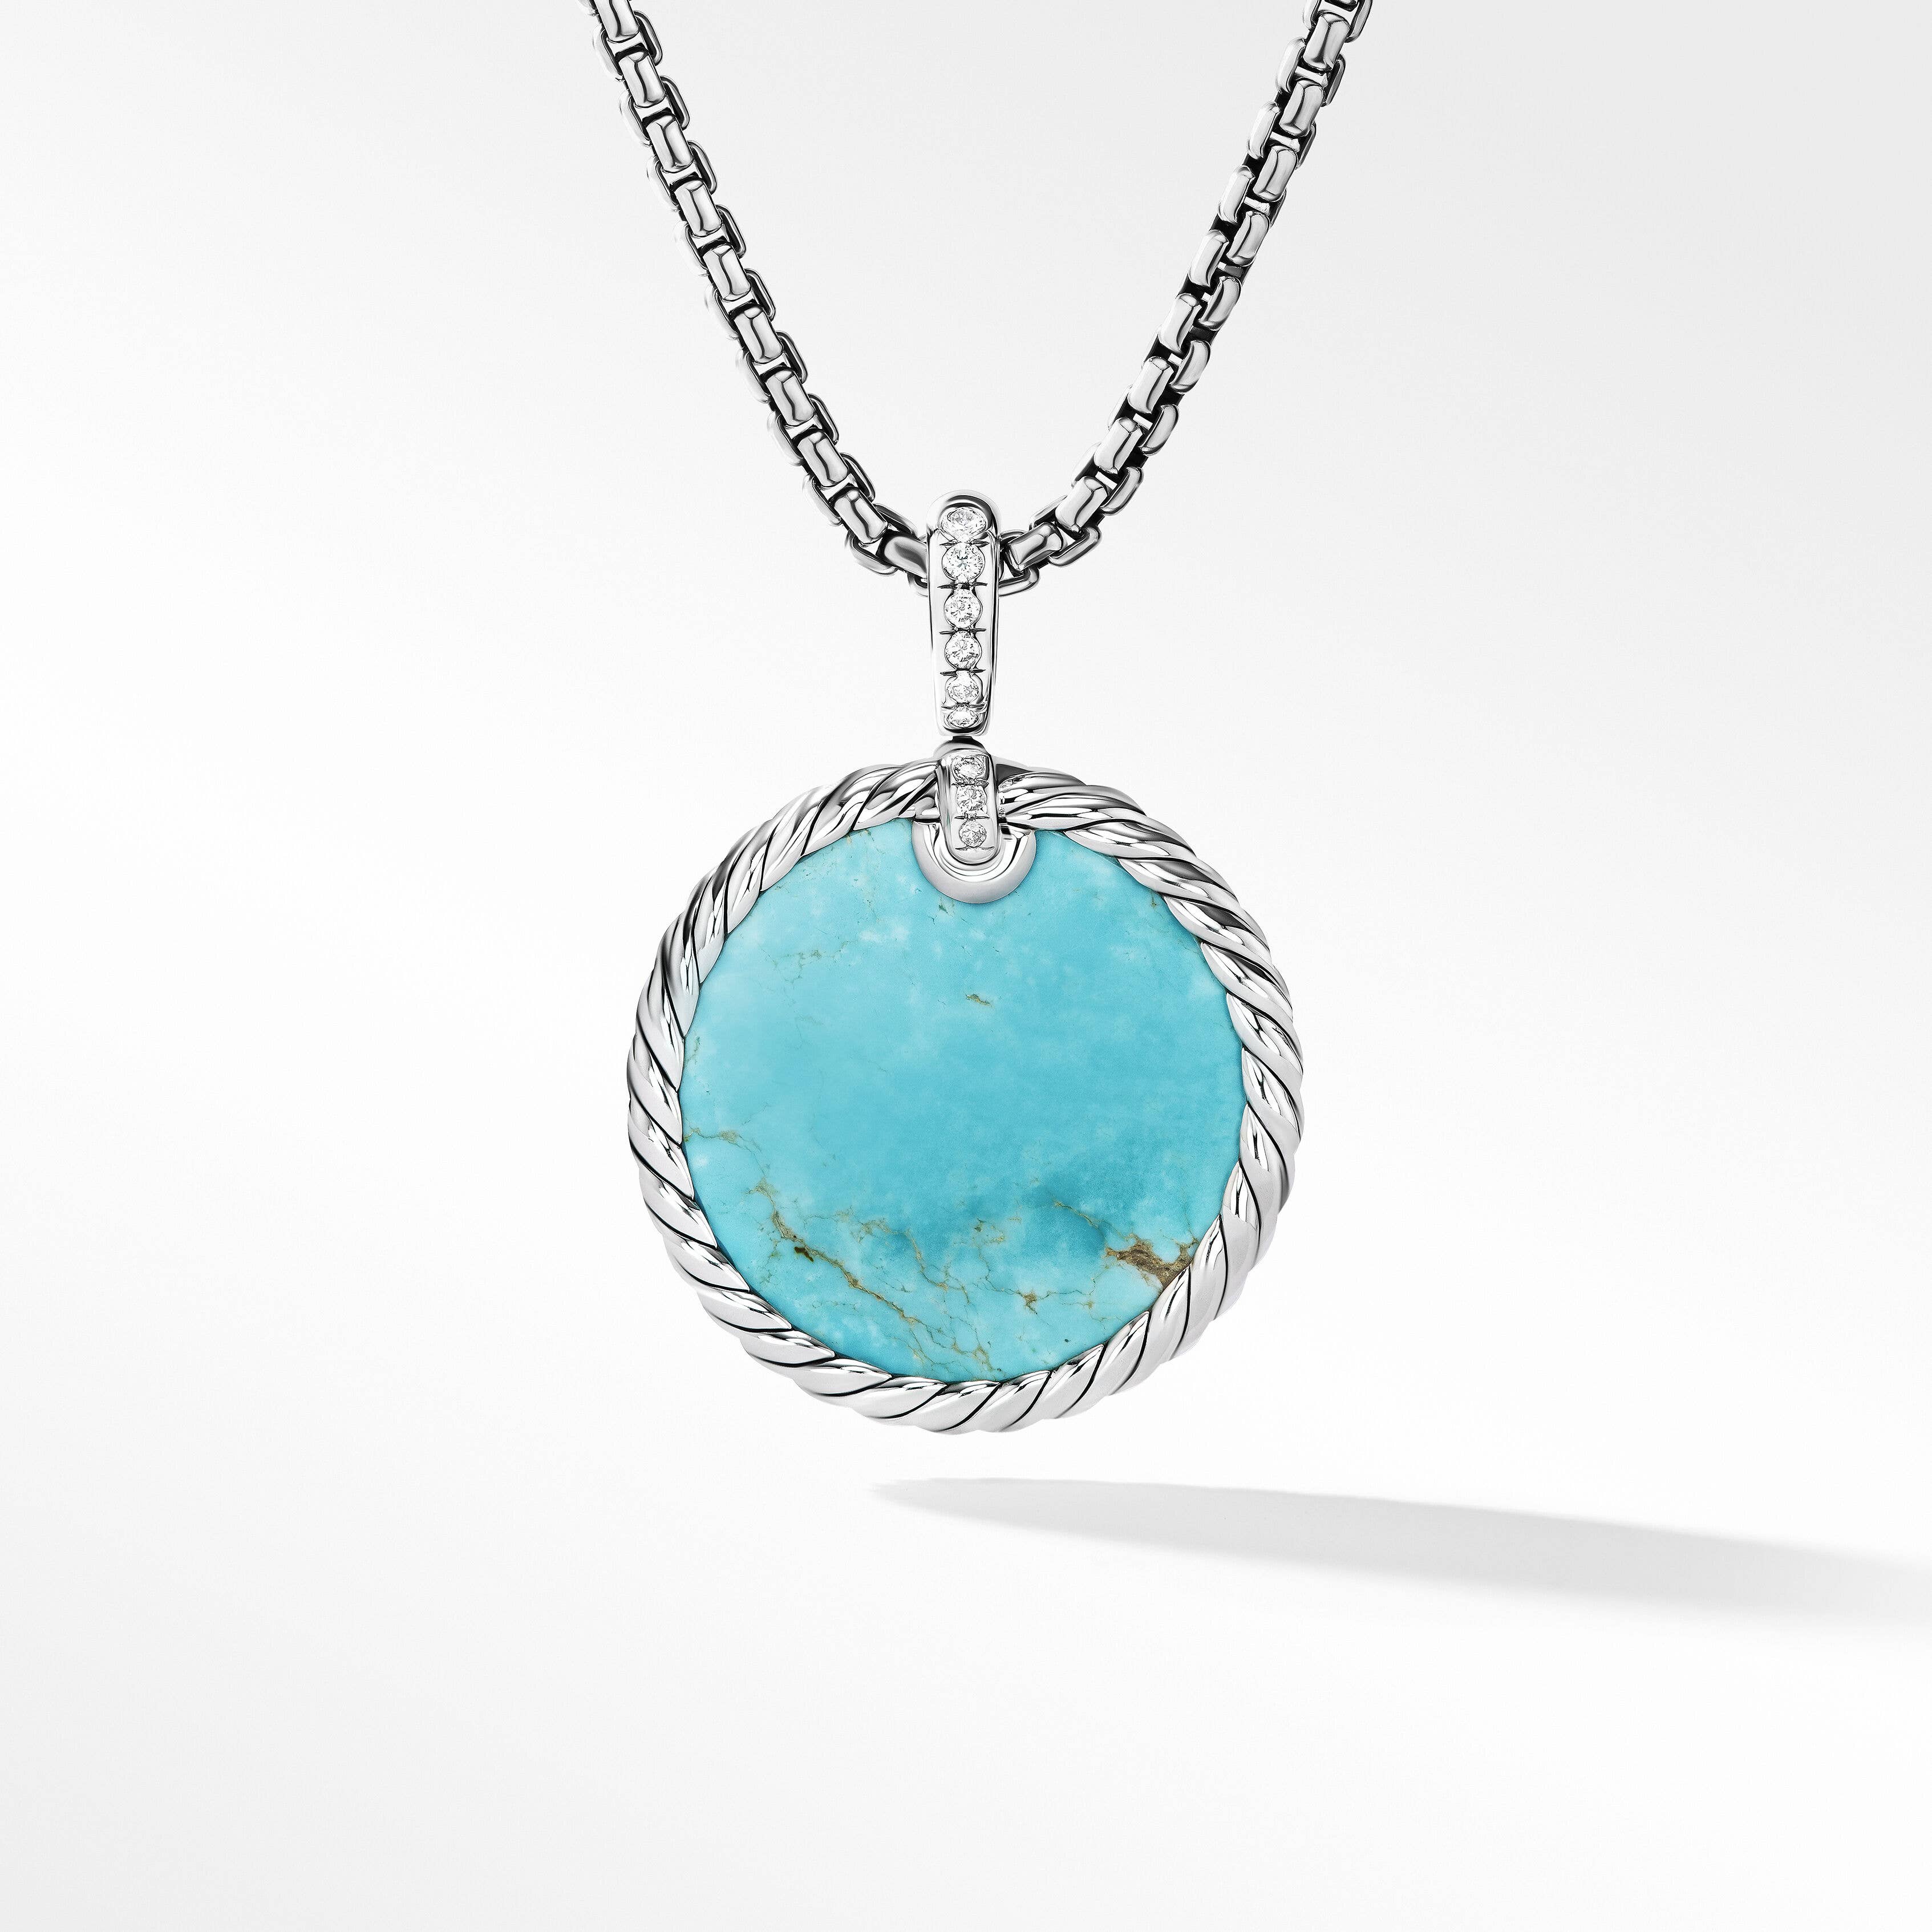 DY Elements® Disc Pendant in Sterling Silver with Turquoise Reversible to Mother of Pearl and Pavé Diamonds